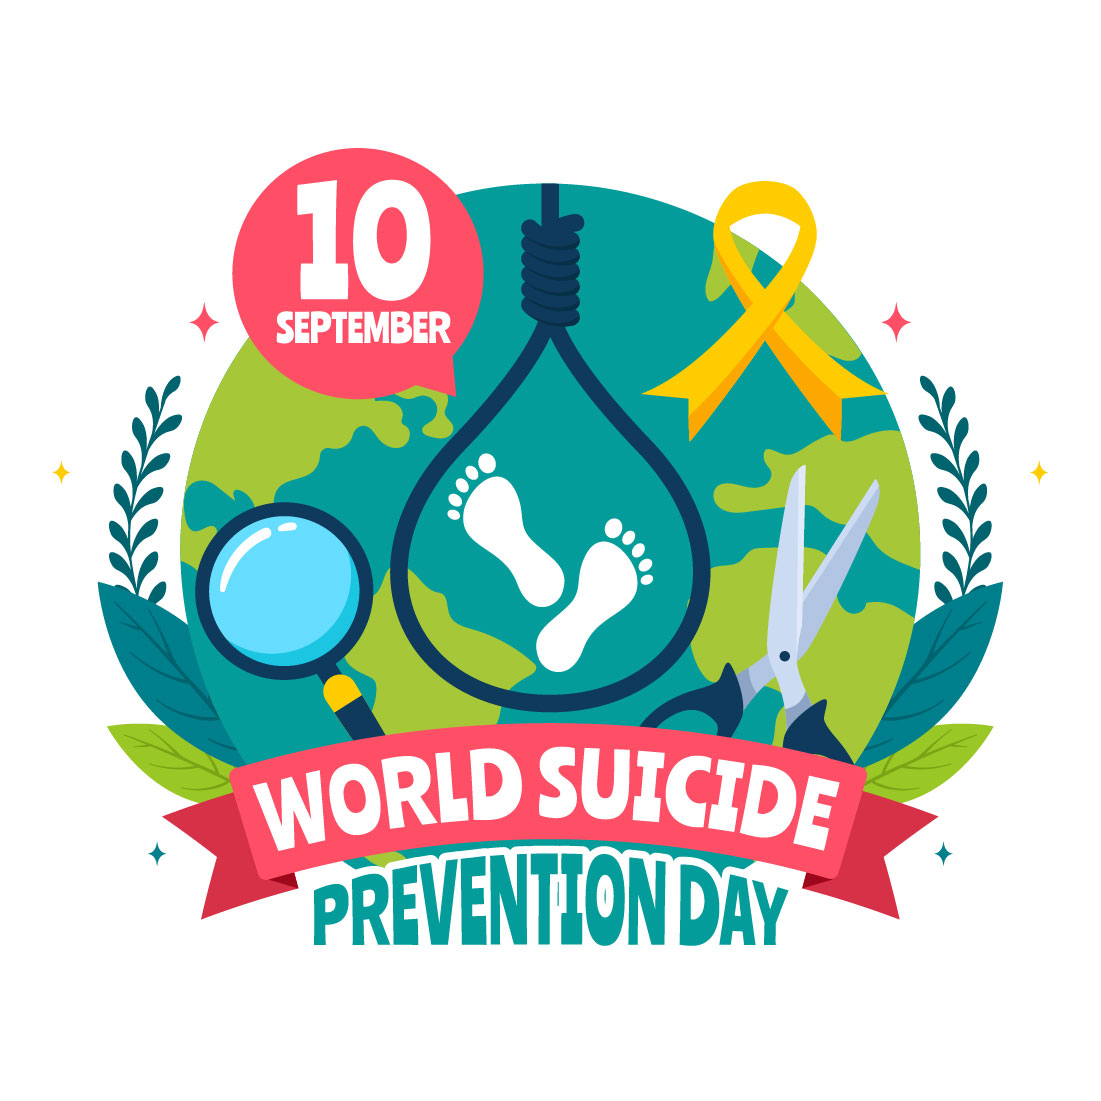 13 World Suicide Prevention Day Illustration preview image.